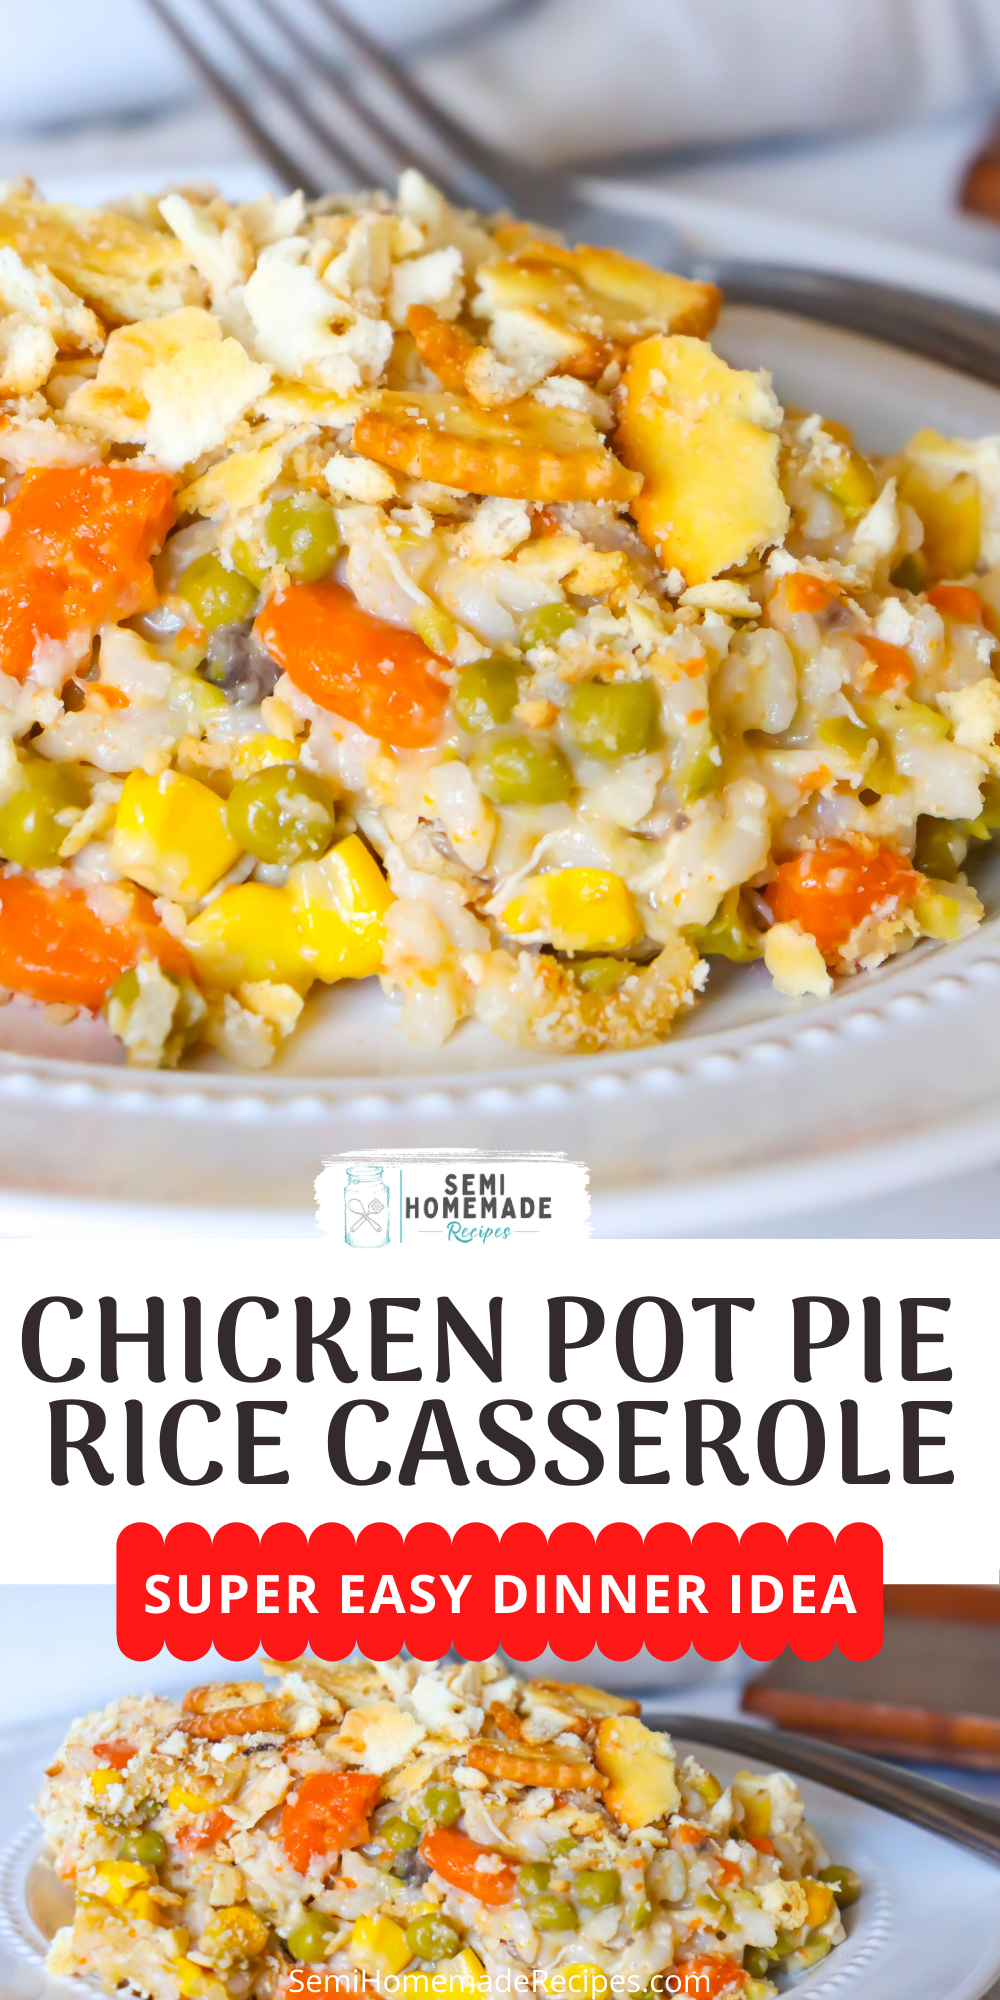 Chicken Pot Pie Rice Casserole is a great and easy recipe that cooks in 30 minutes and has all of the great flavors of a southern homemade Chicken Pot Pie!